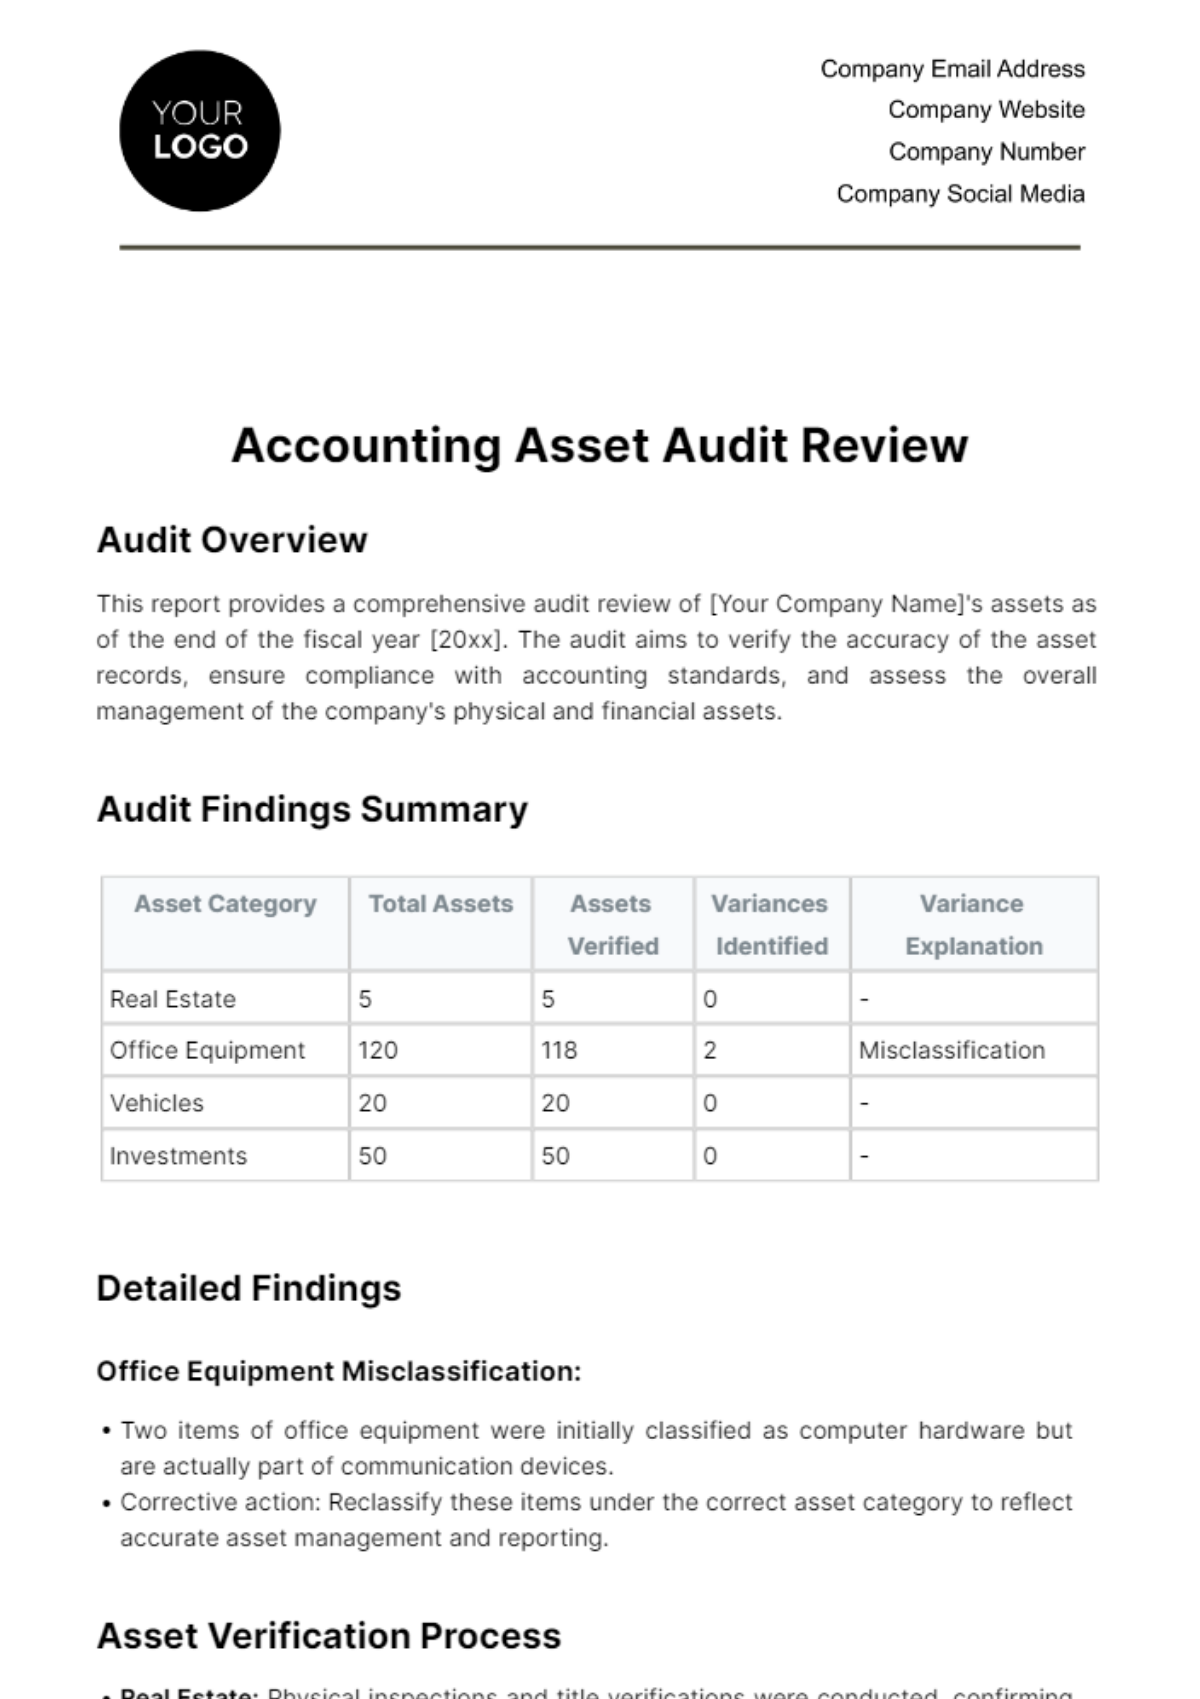 Accounting Asset Audit Review Template